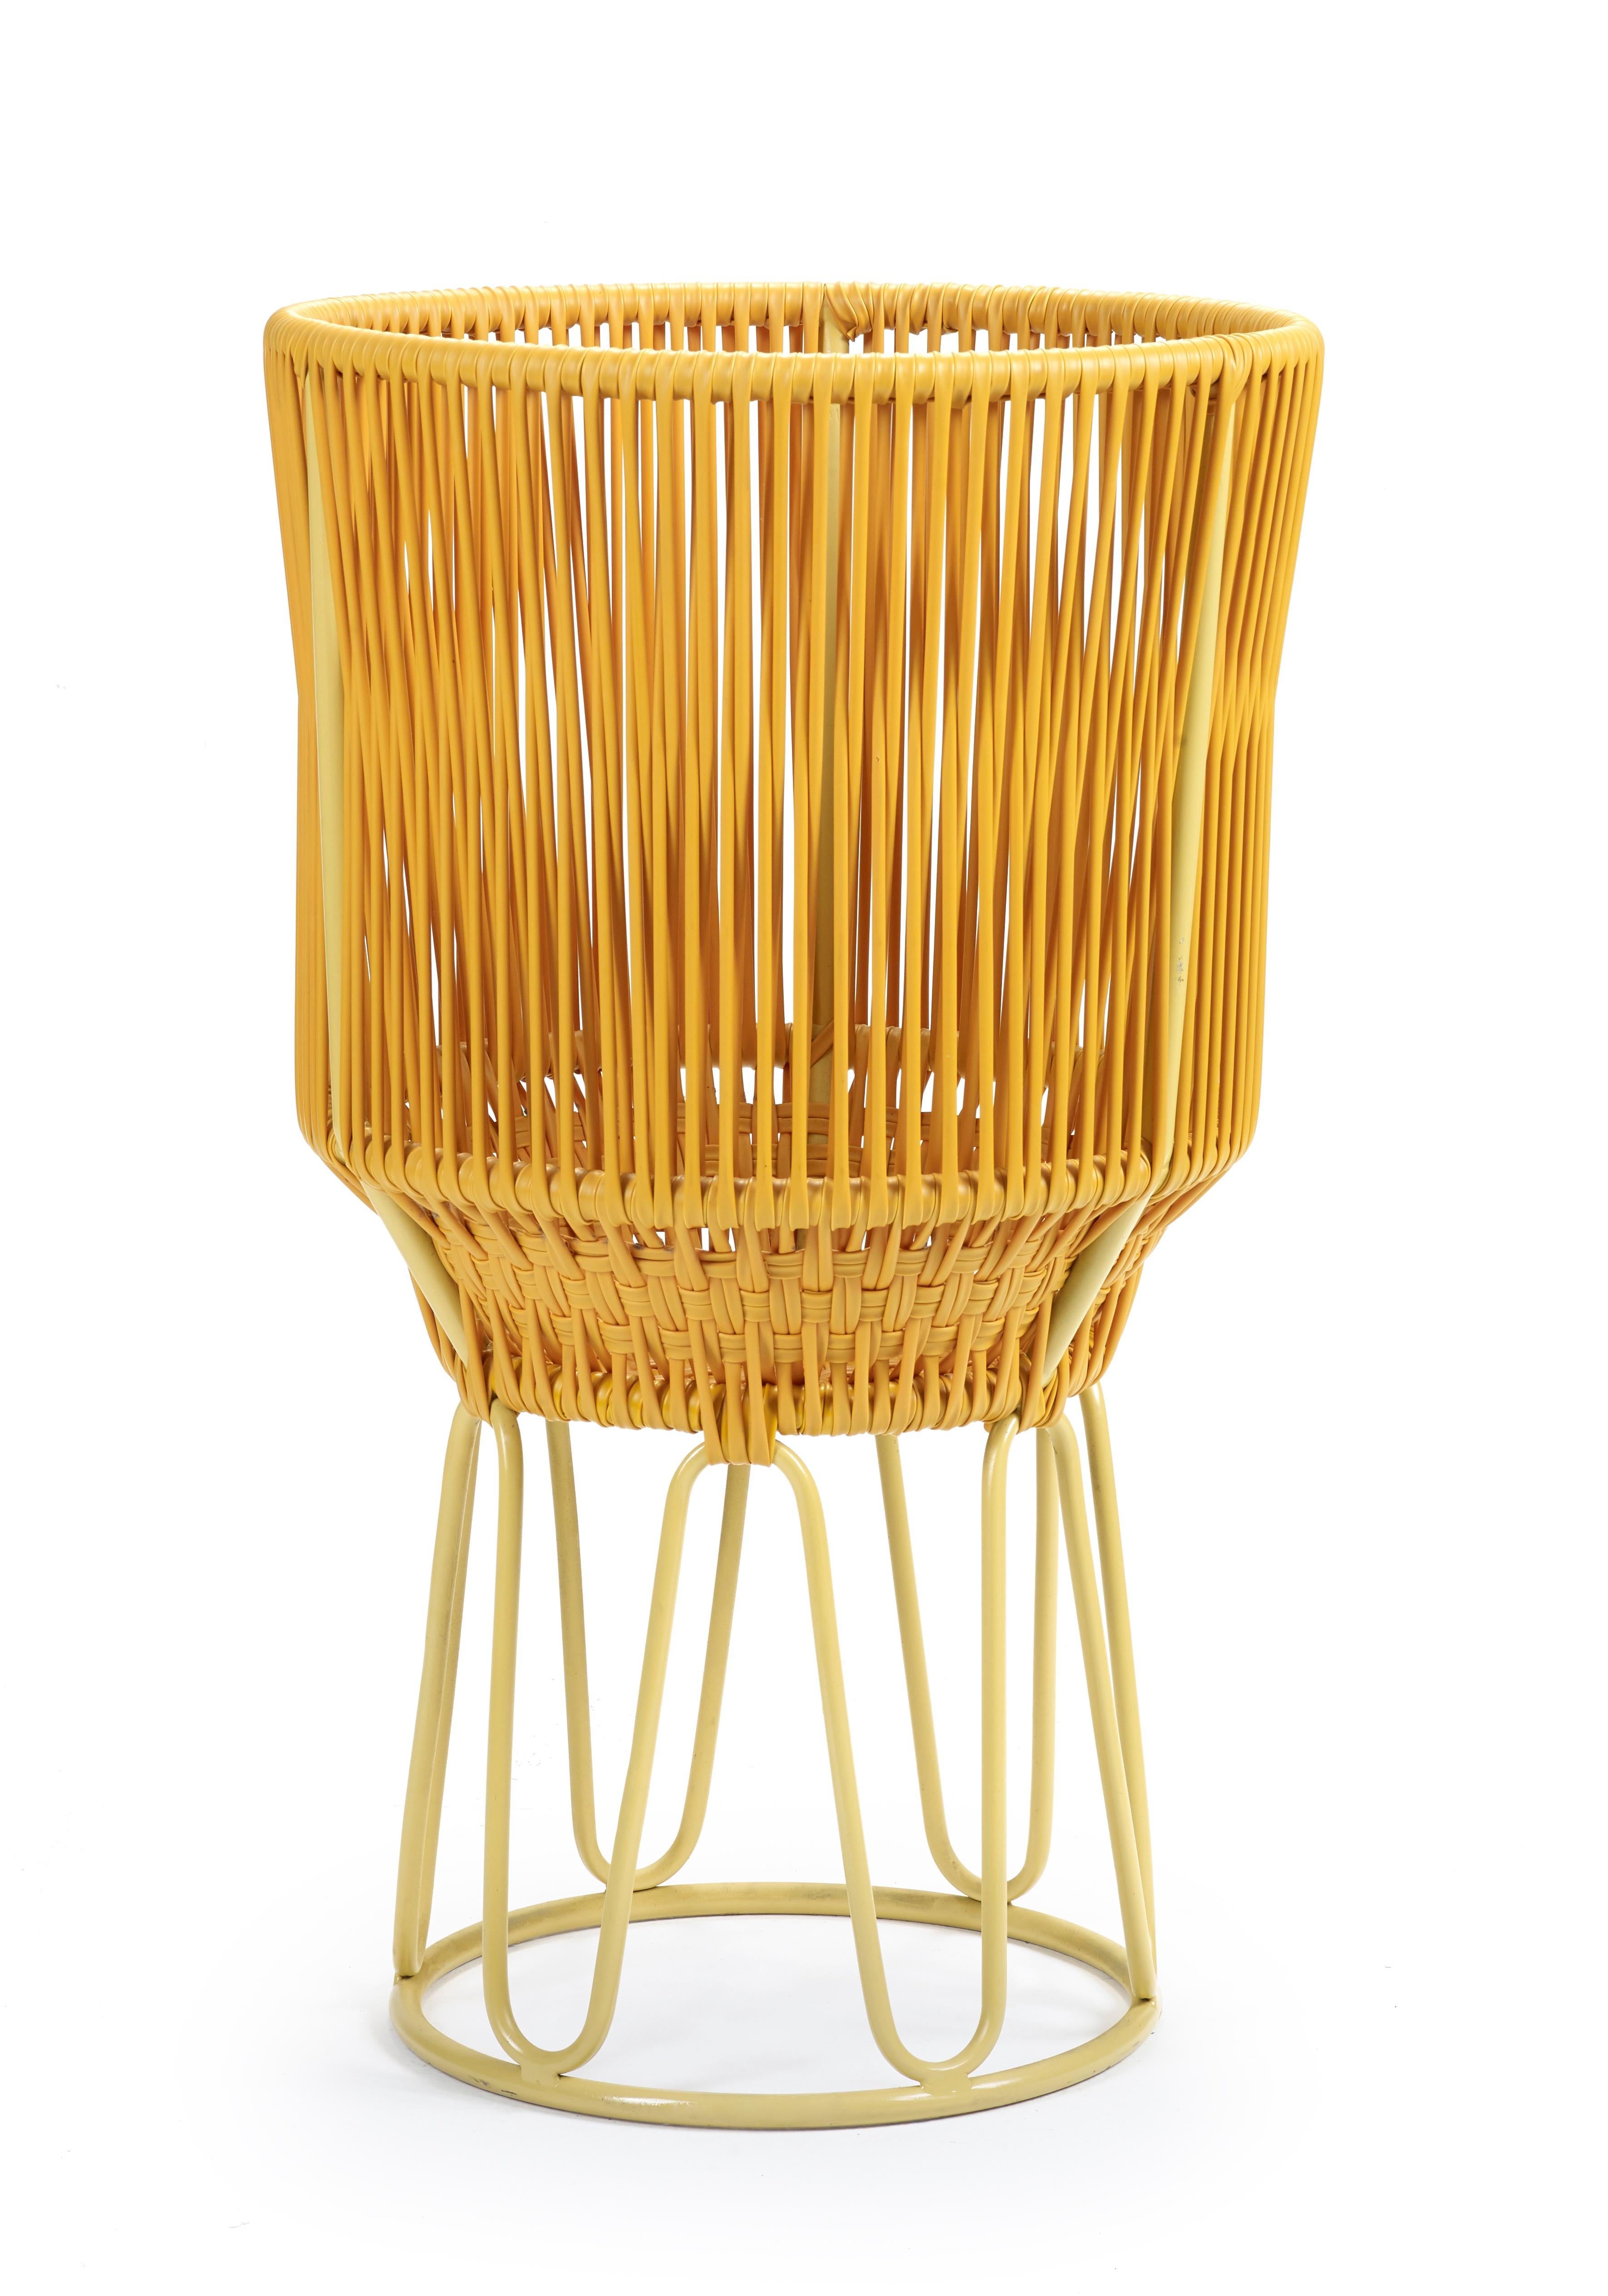 Honey Circo flower pot 2 by Sebastian Herkner
Materials: Galvanized and powder-coated tubular steel. PVC strings.
Technique: Made from recycled plastic. Weaved by local craftspeople in Colombia. 
Dimensions: 
Top Diameter 40 x H 68 cm 
Base